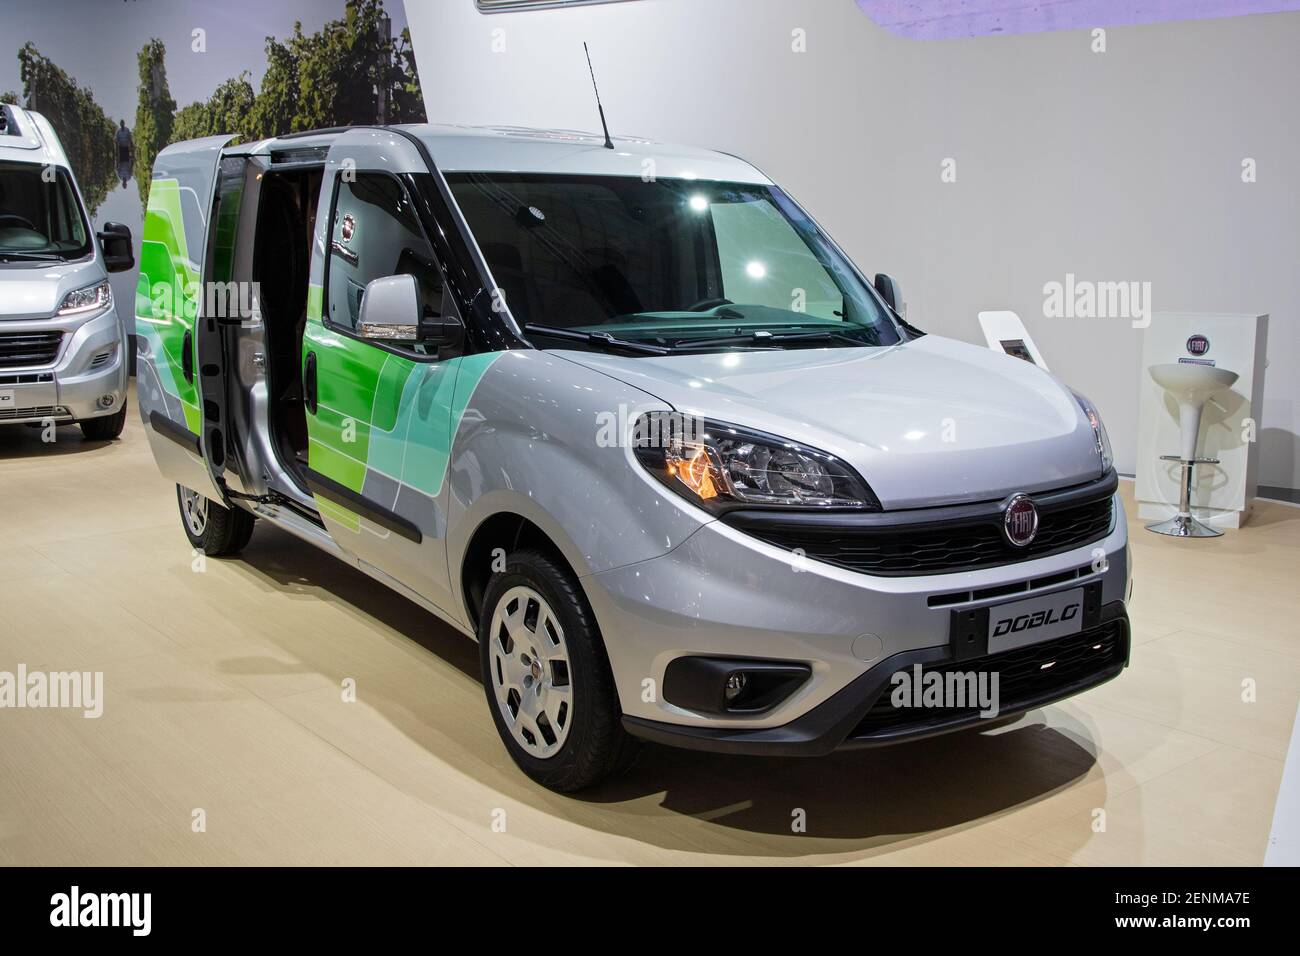 Fiat Doblo commercial vehicle at the Brussels Autosalon Motor Show. Belgium  - January 18, 2019 Stock Photo - Alamy